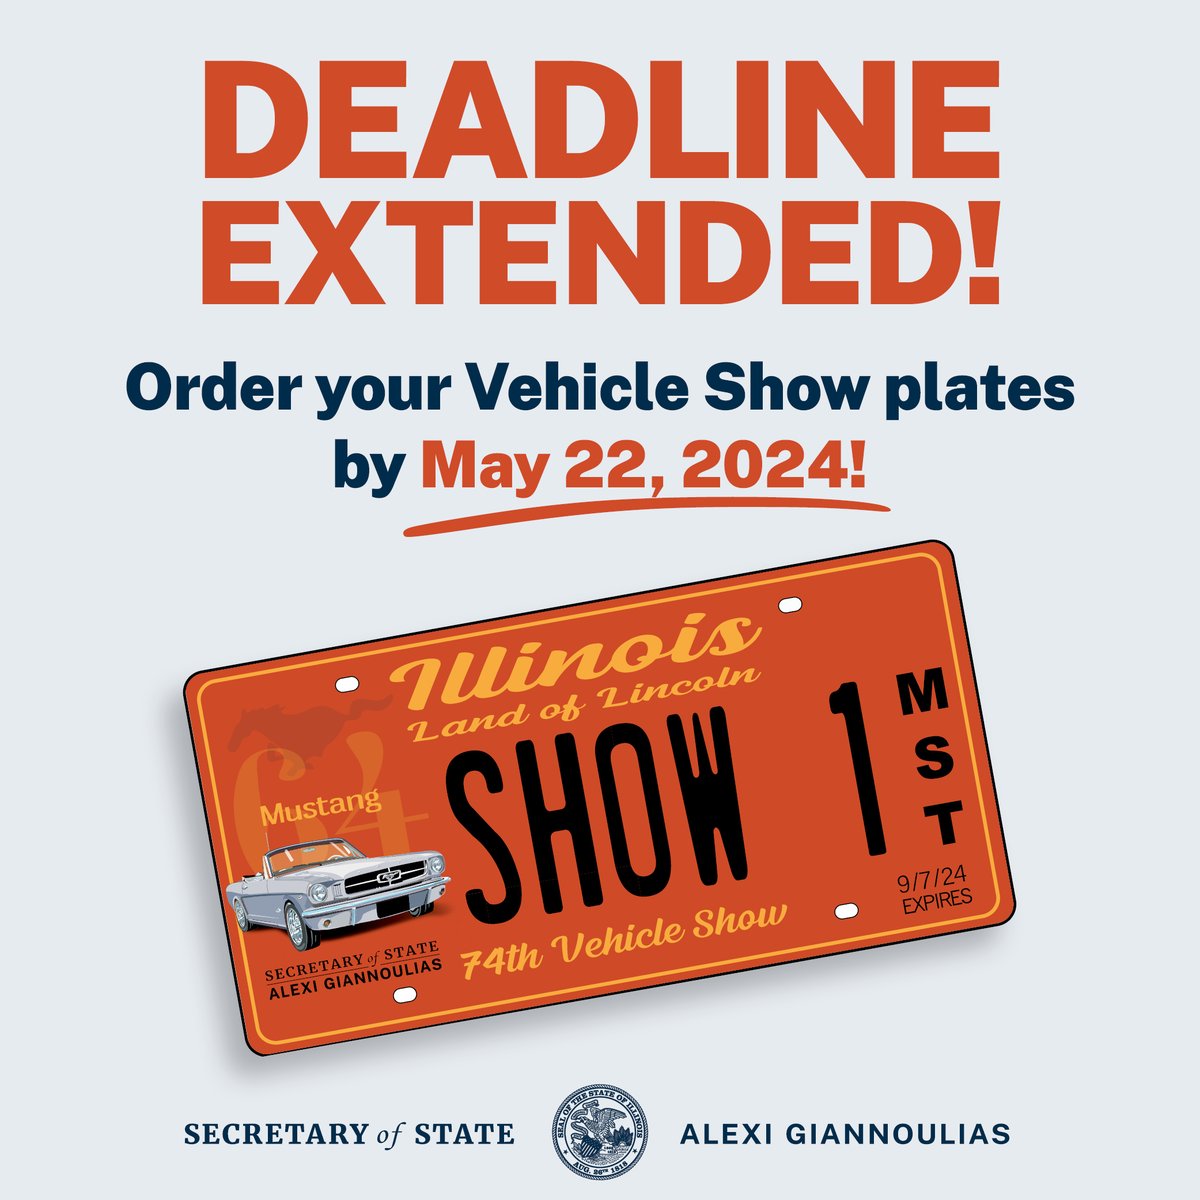 🚨DEADLINE EXTENDED!🚨 You still have time to order your special event vehicle show license plates for the 74th Annual Secretary of State’s Vehicle Show in Springfield on September 7th, 2024! But hurry, the new deadline is May 22, 2024. Request form ⤵️⤵️ ilsos.gov/publications/p…